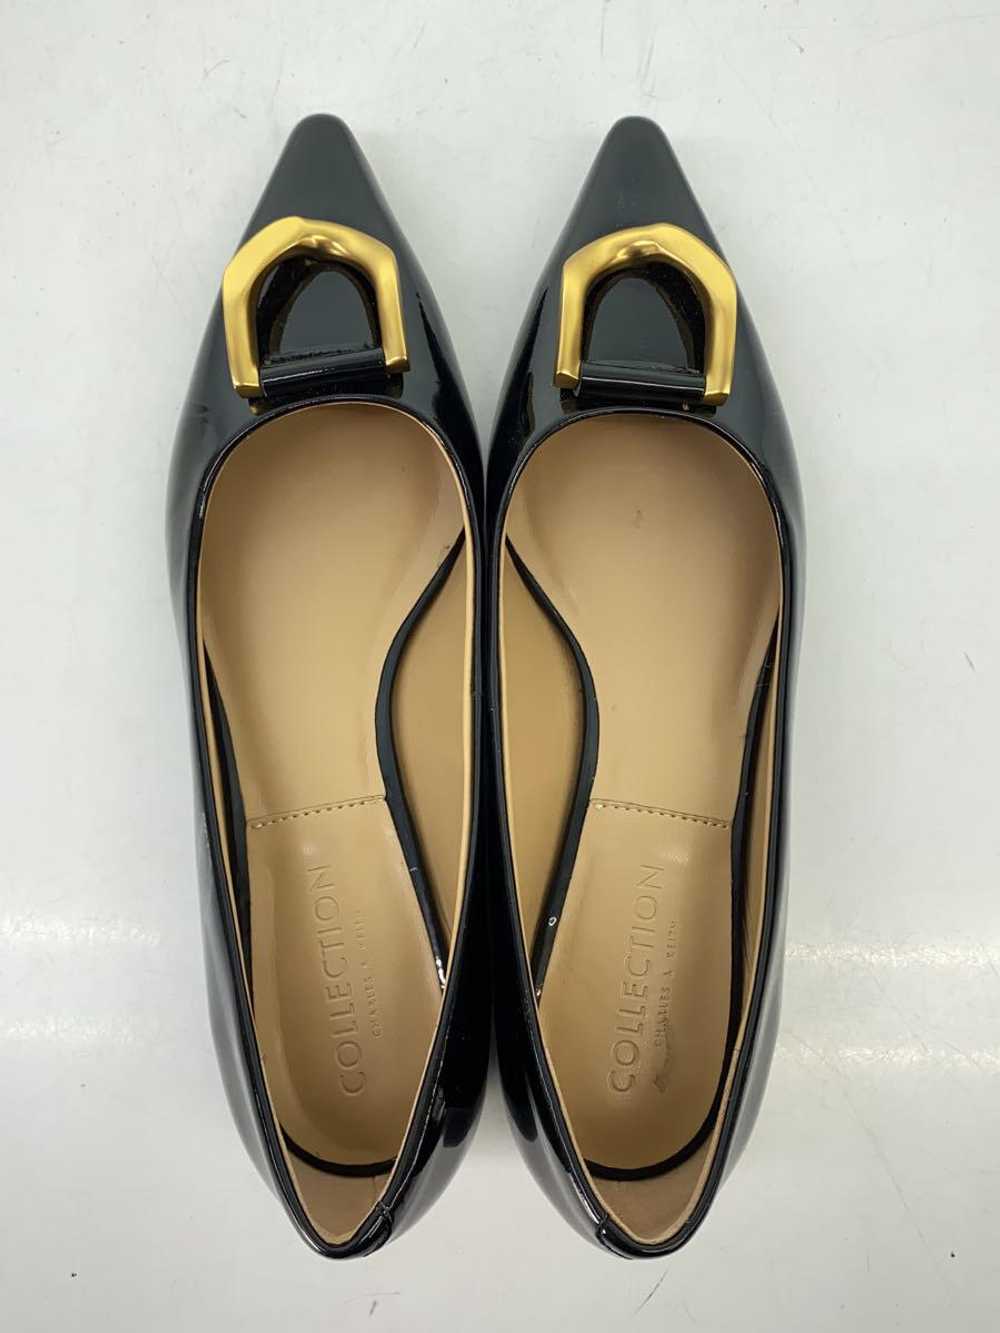 Charles&Keith Flat Pumps/35/Blk Shoes BbA20 - image 3